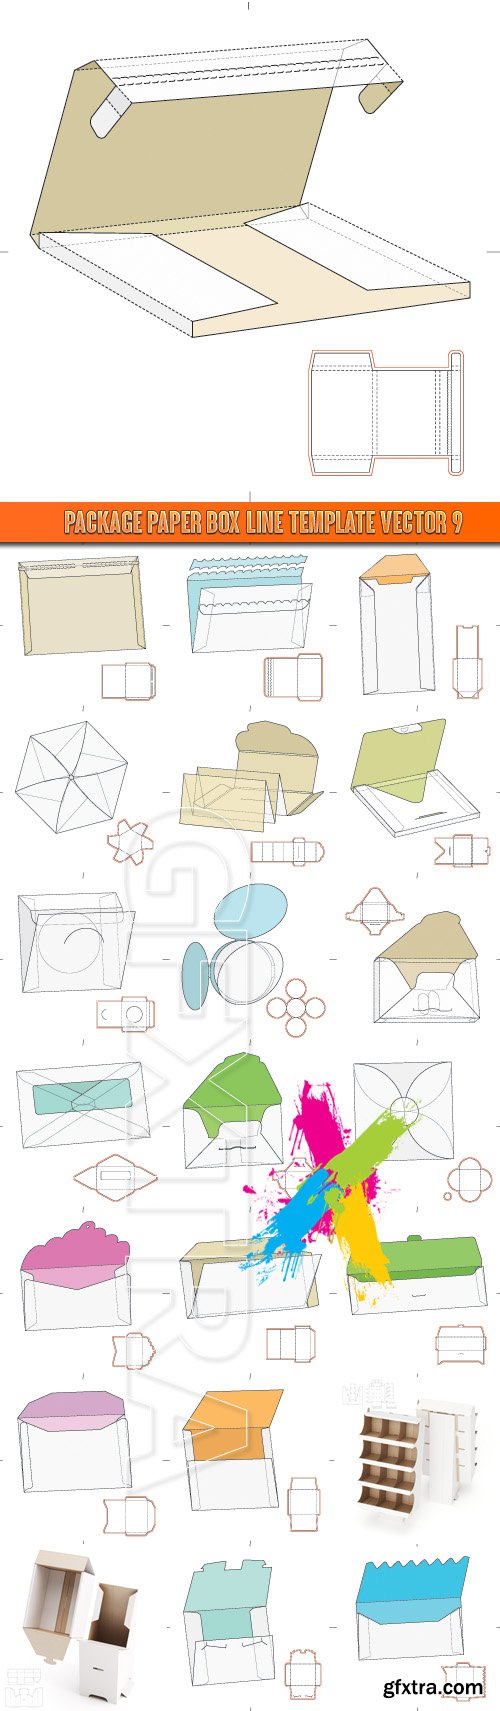 Package paper box line template vector 9